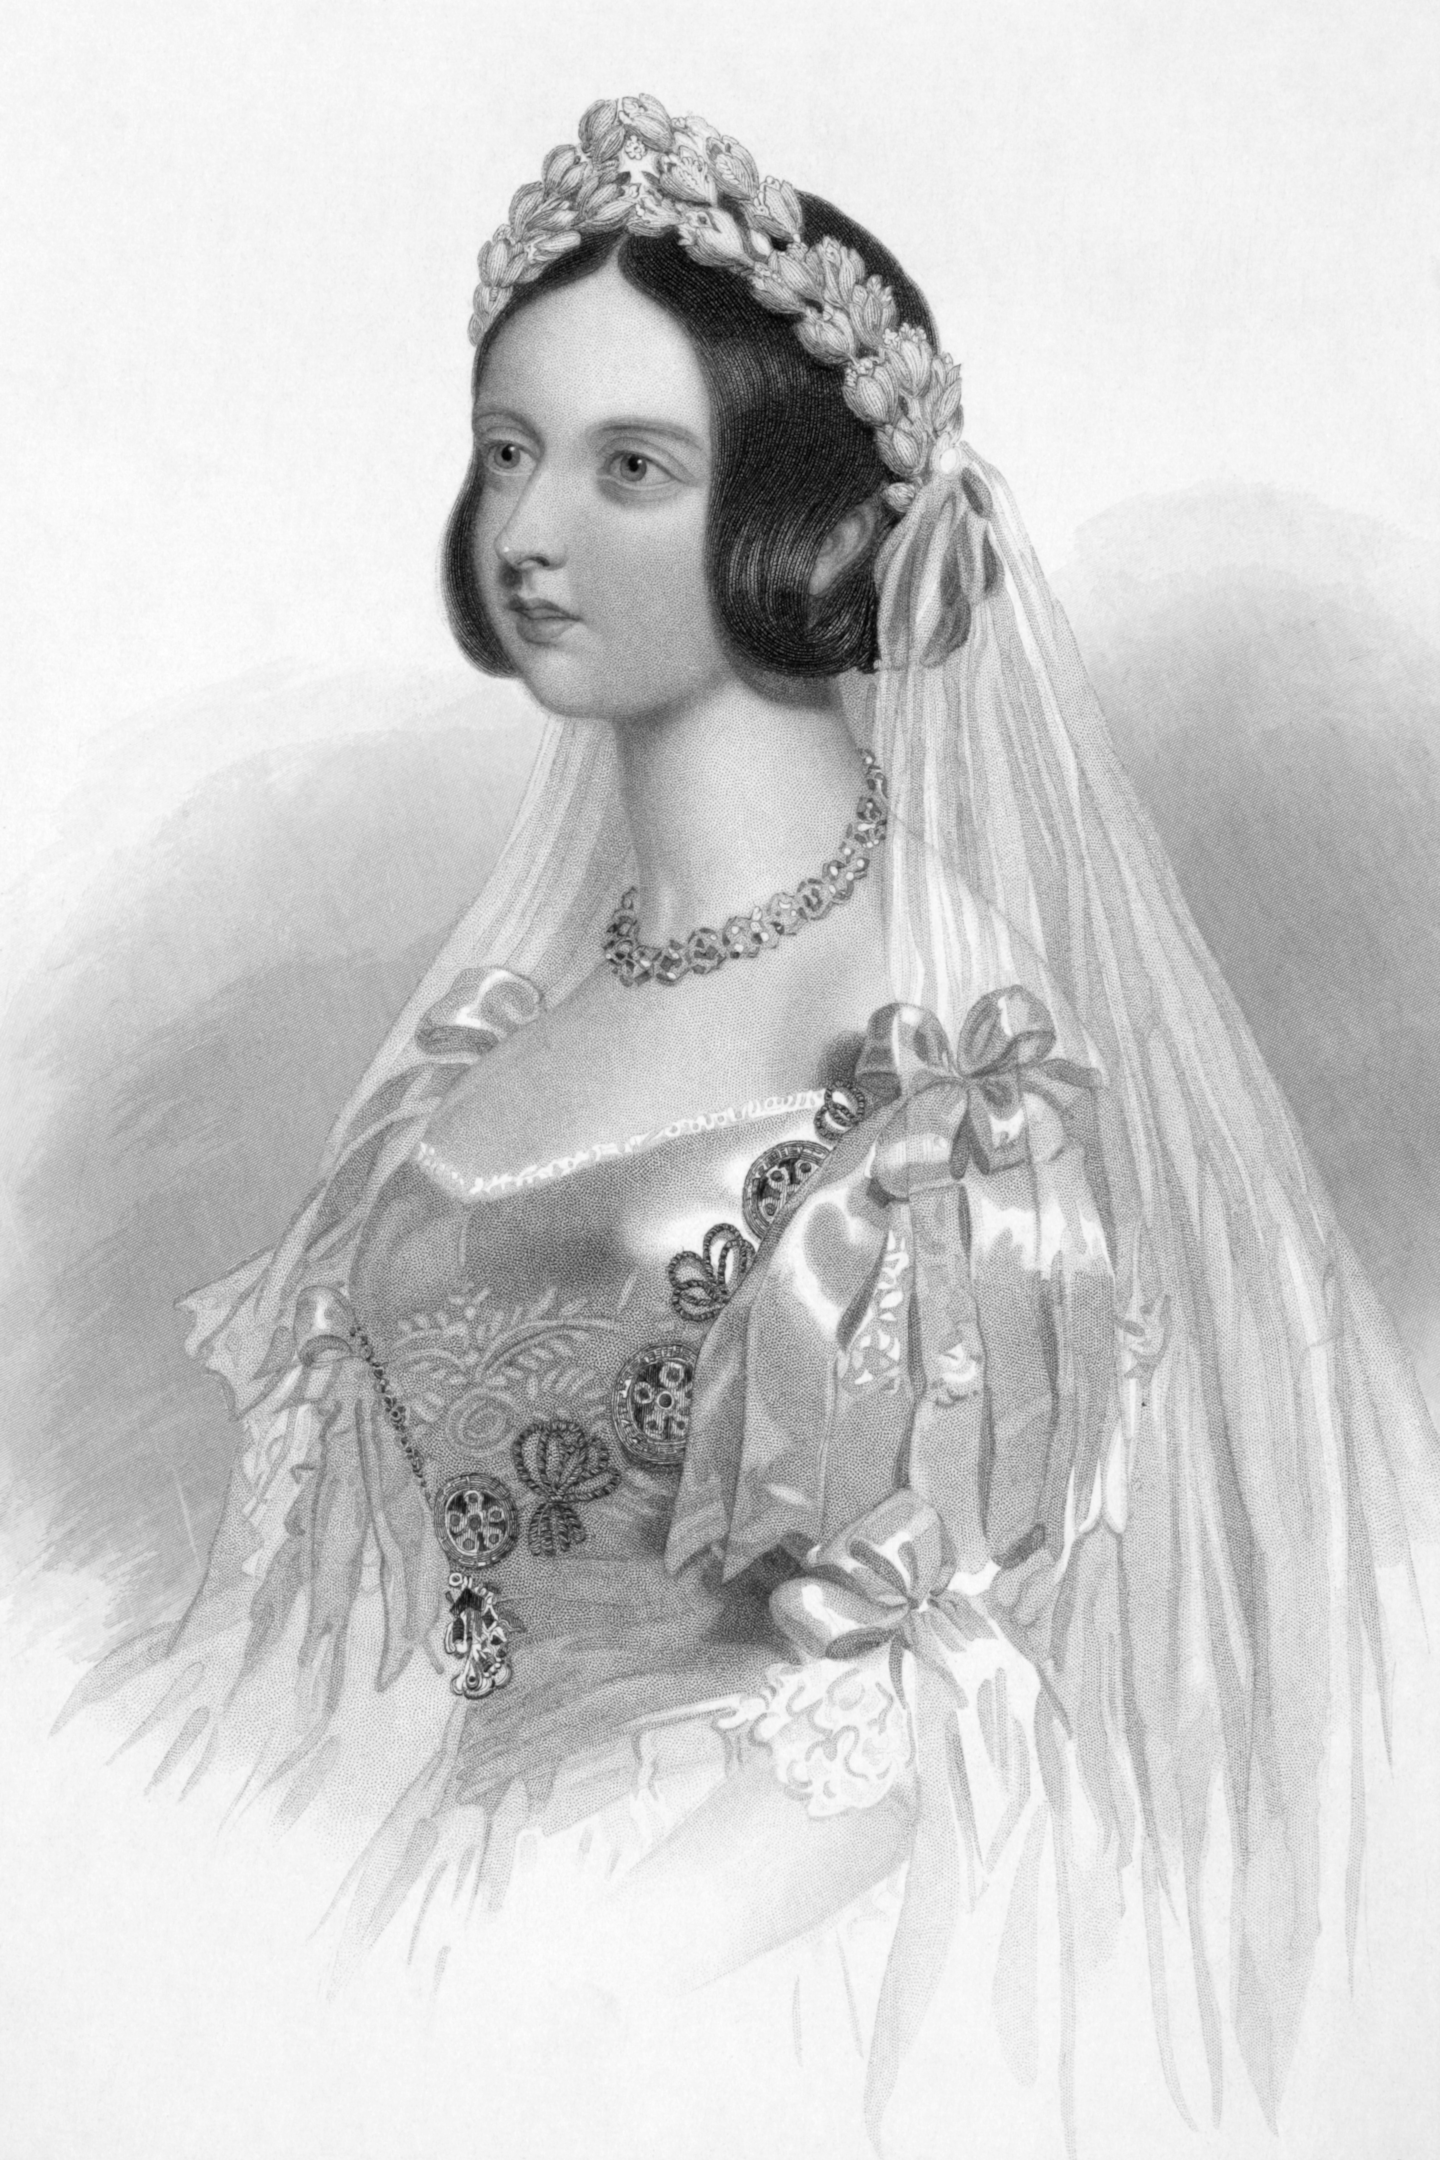 The Bride in White: How Queen Victoria Changed Everything